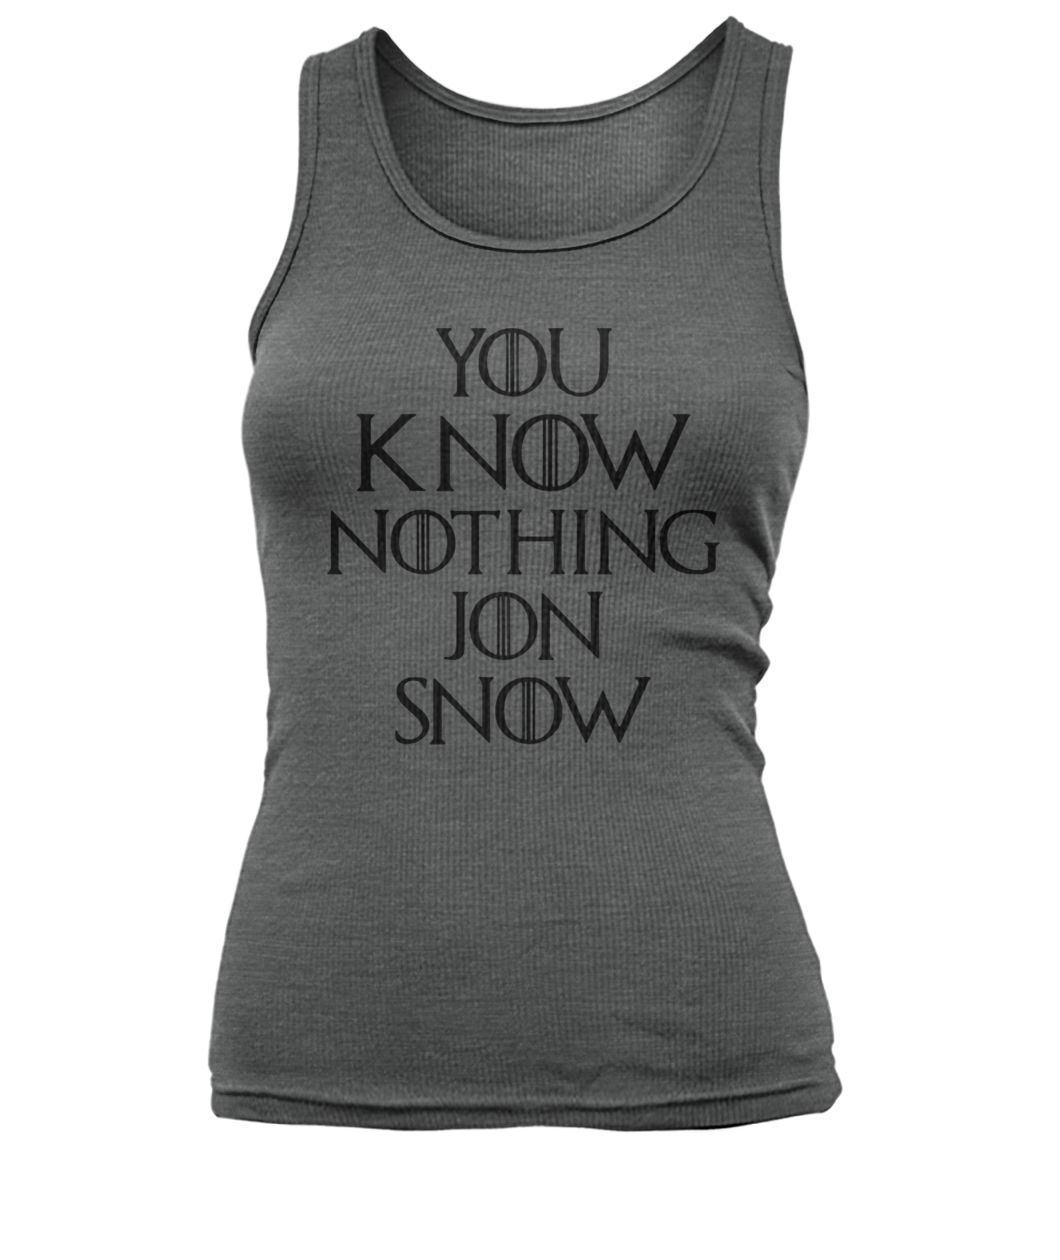 Game of thrones you know nothing jon snow women's tank top